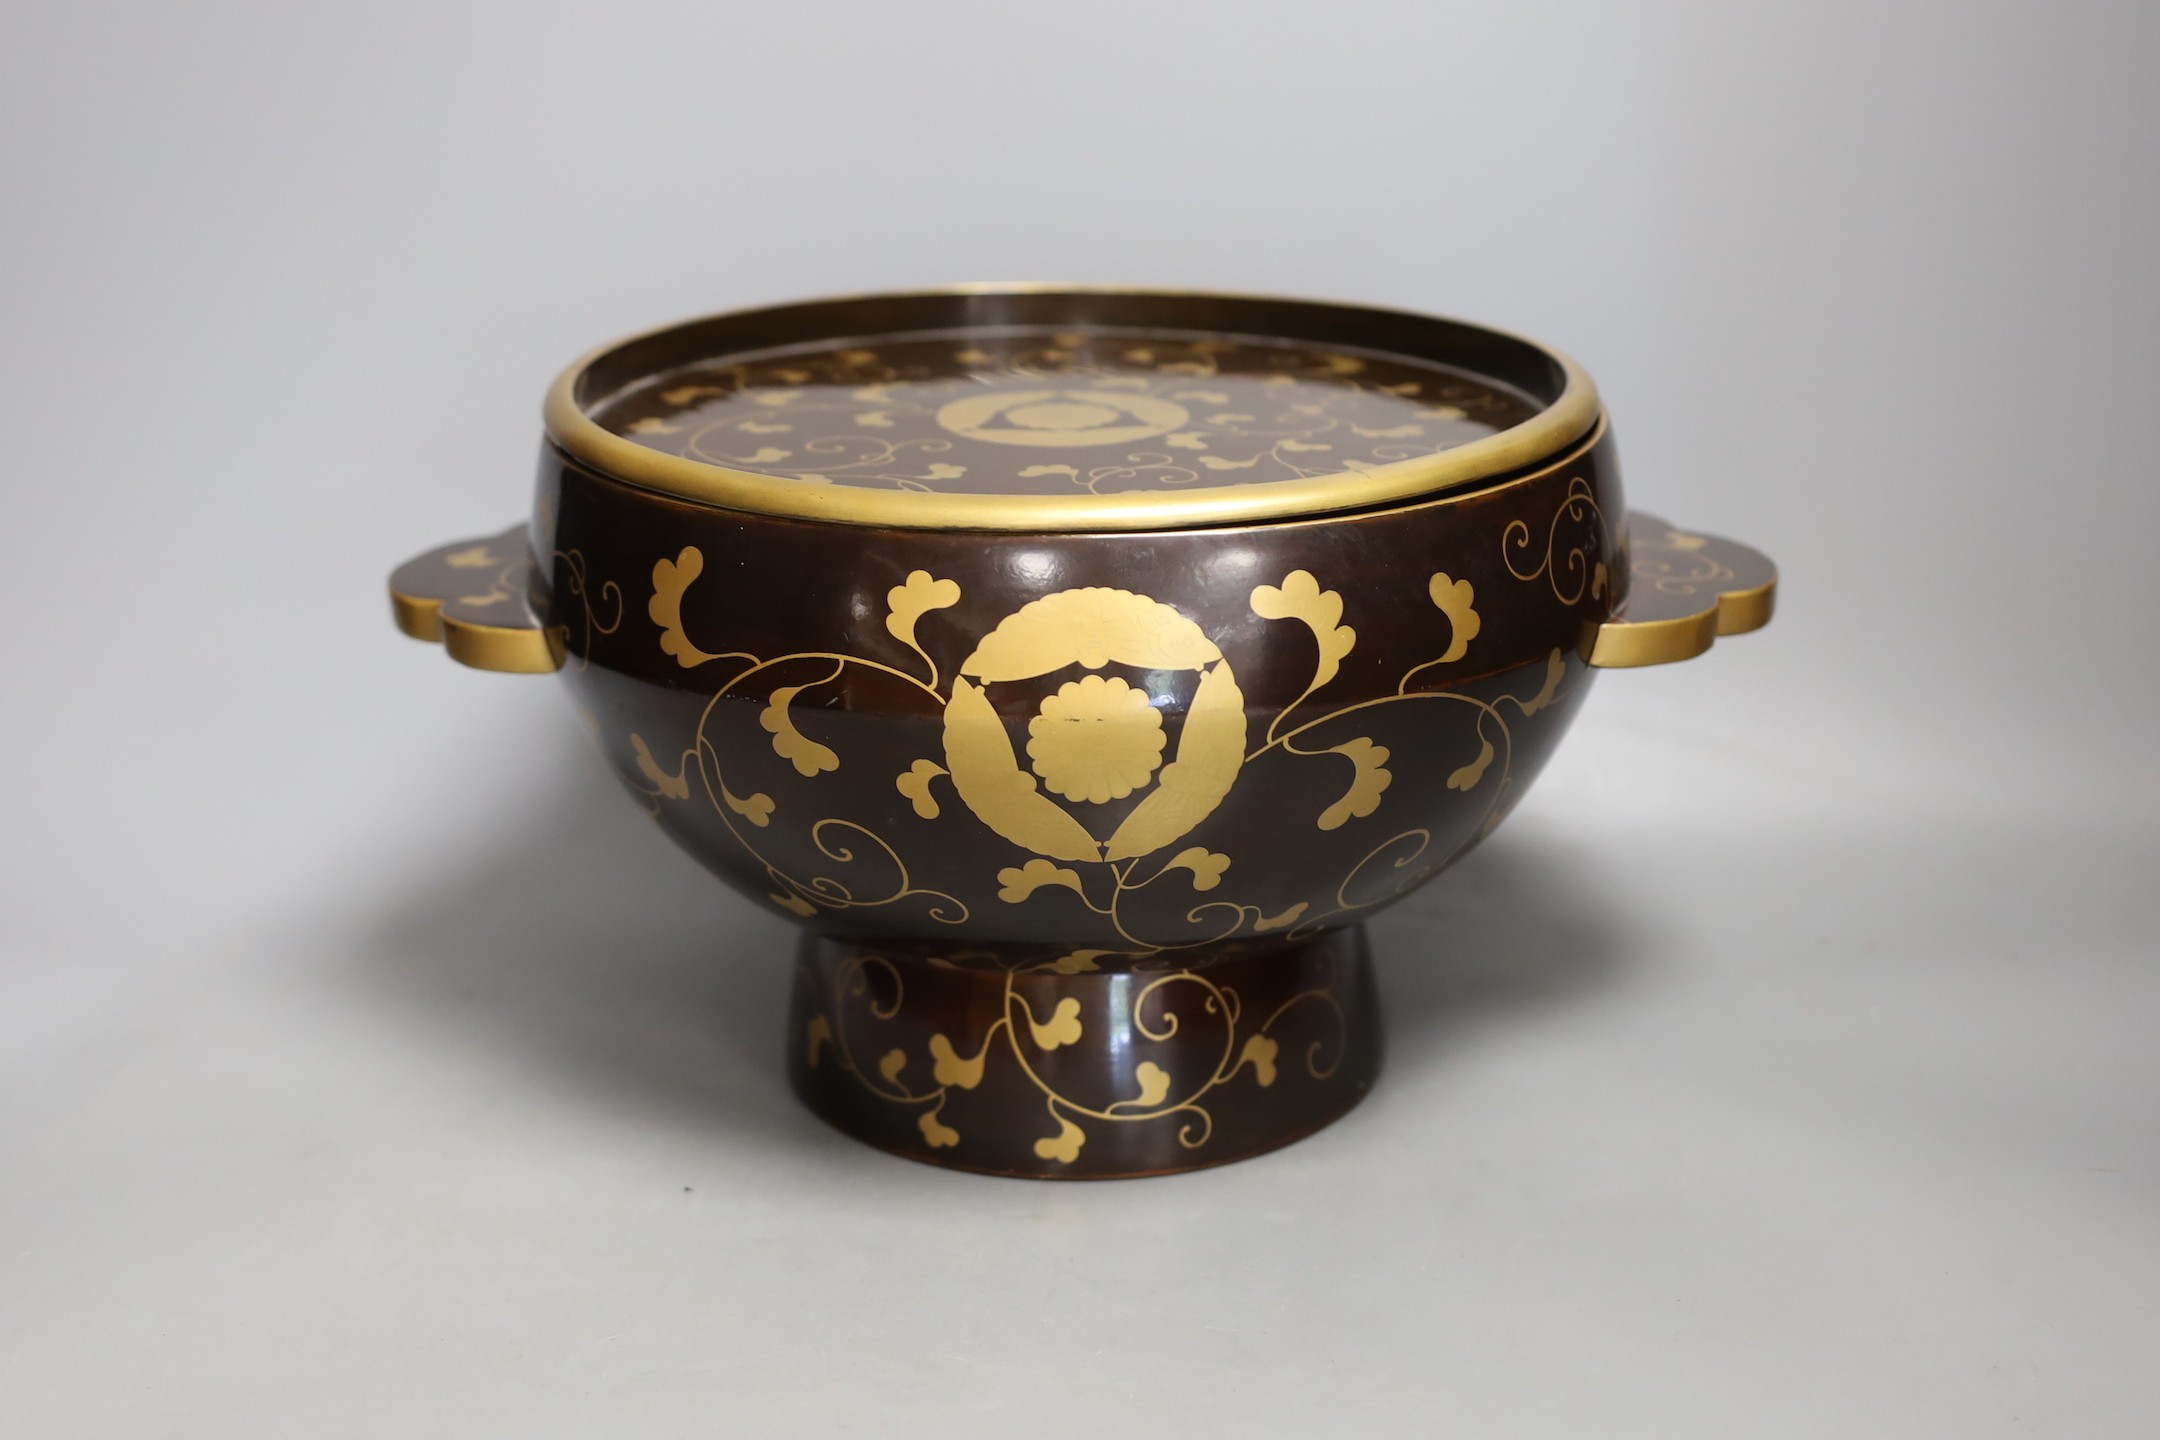 An early 20th century Japanese gilt decorated lacquer bowl and cover